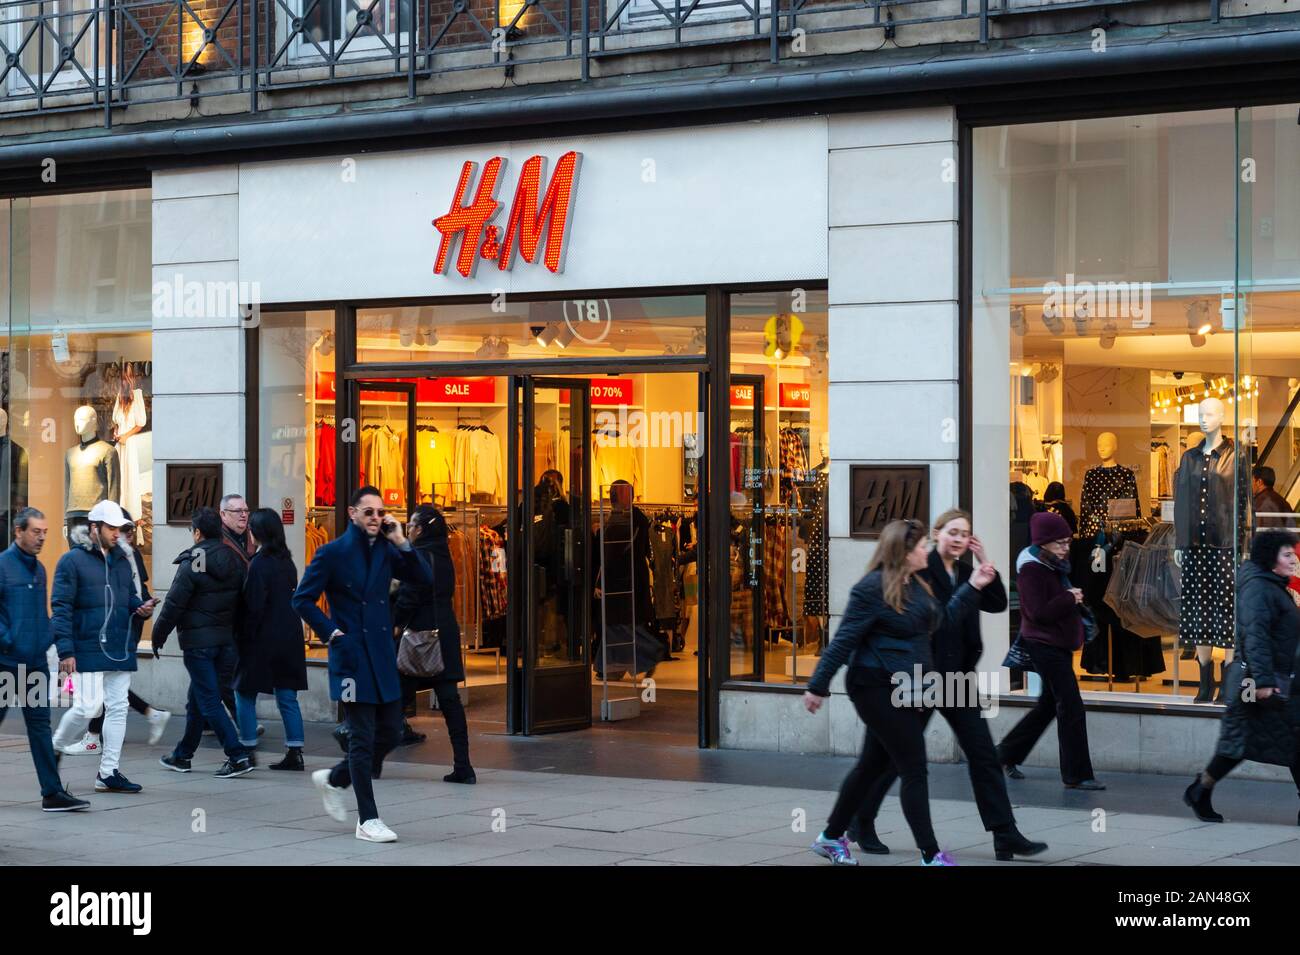 Oxford Street London retail shoppers walking past the H&M retail store shop  front in Oxford Street London on early evening Stock Photo - Alamy